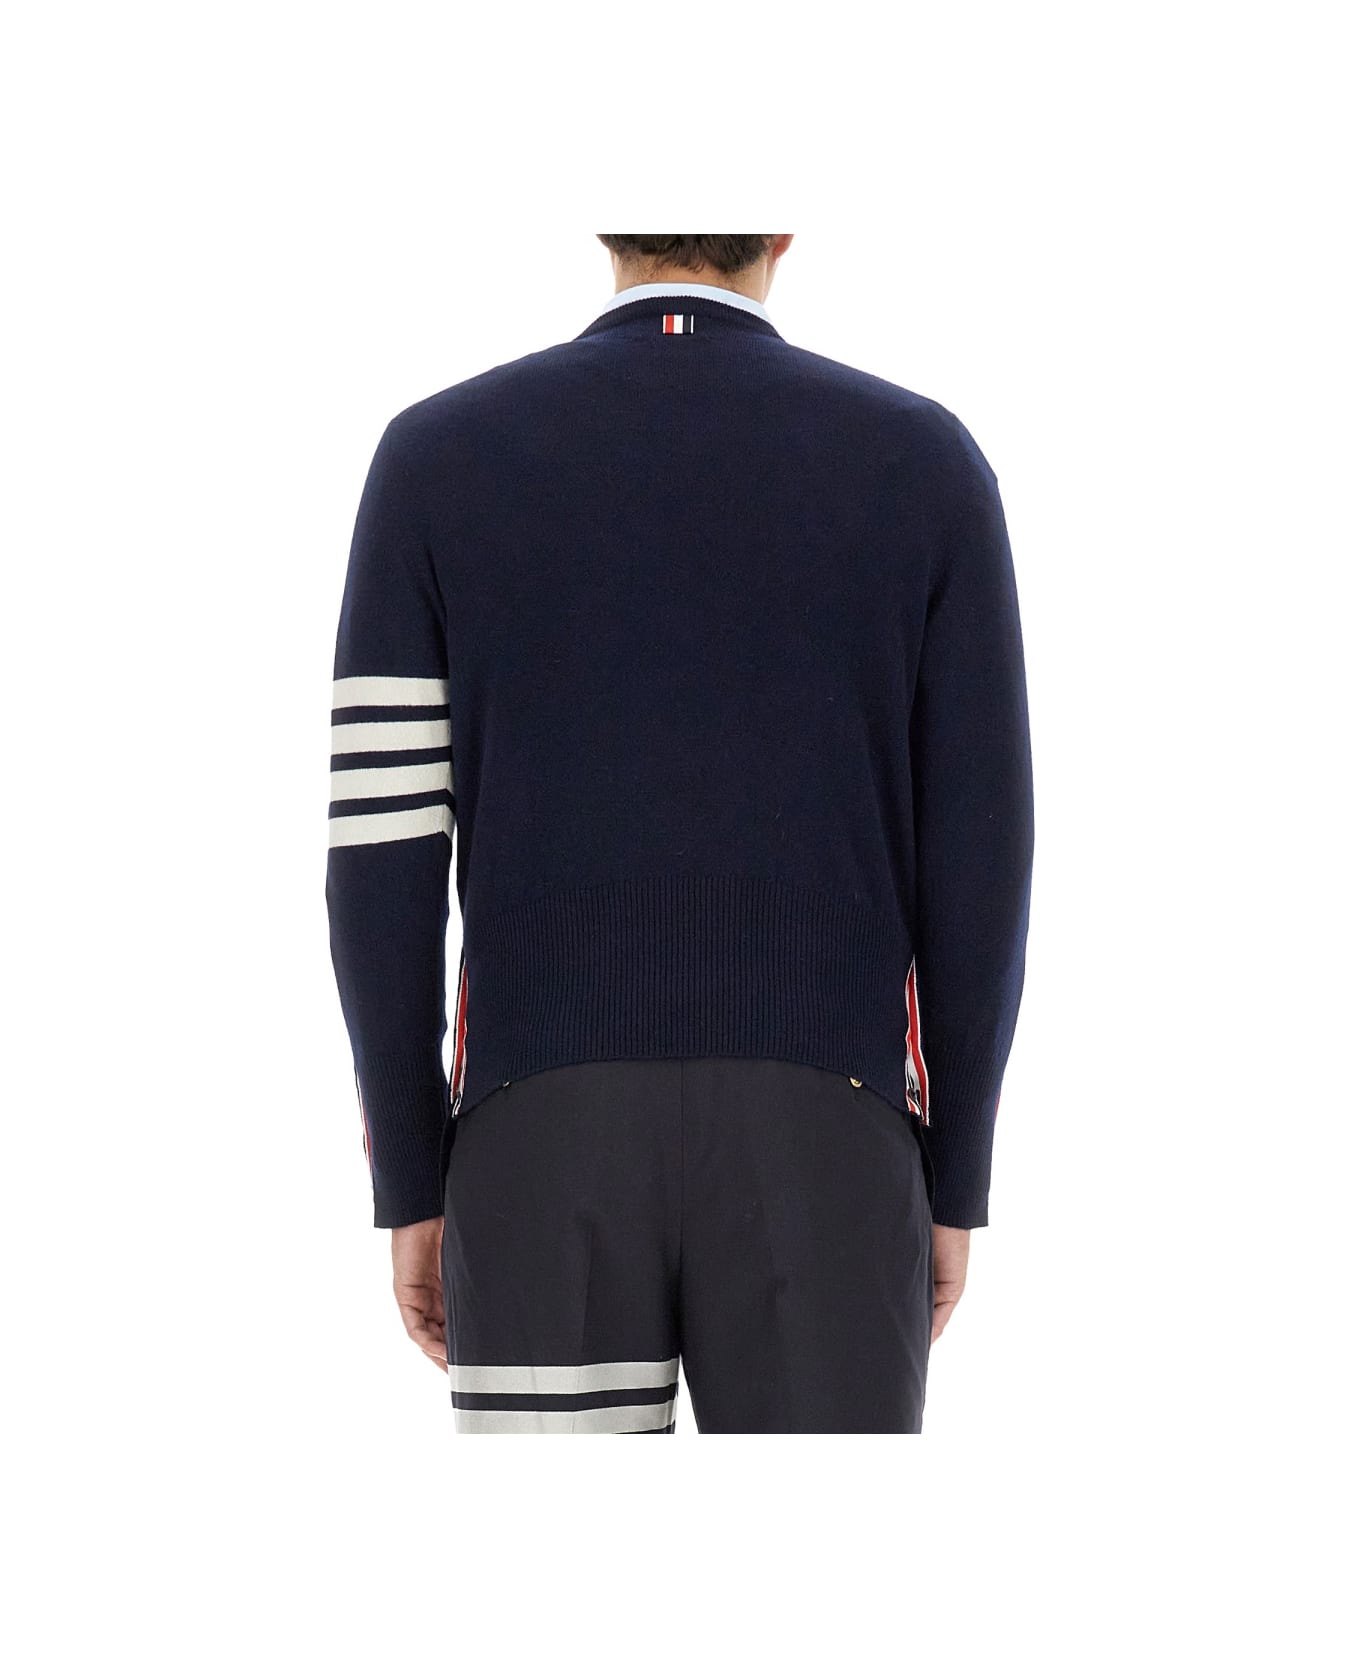 Thom Browne Cashmere Sweater - NAVY